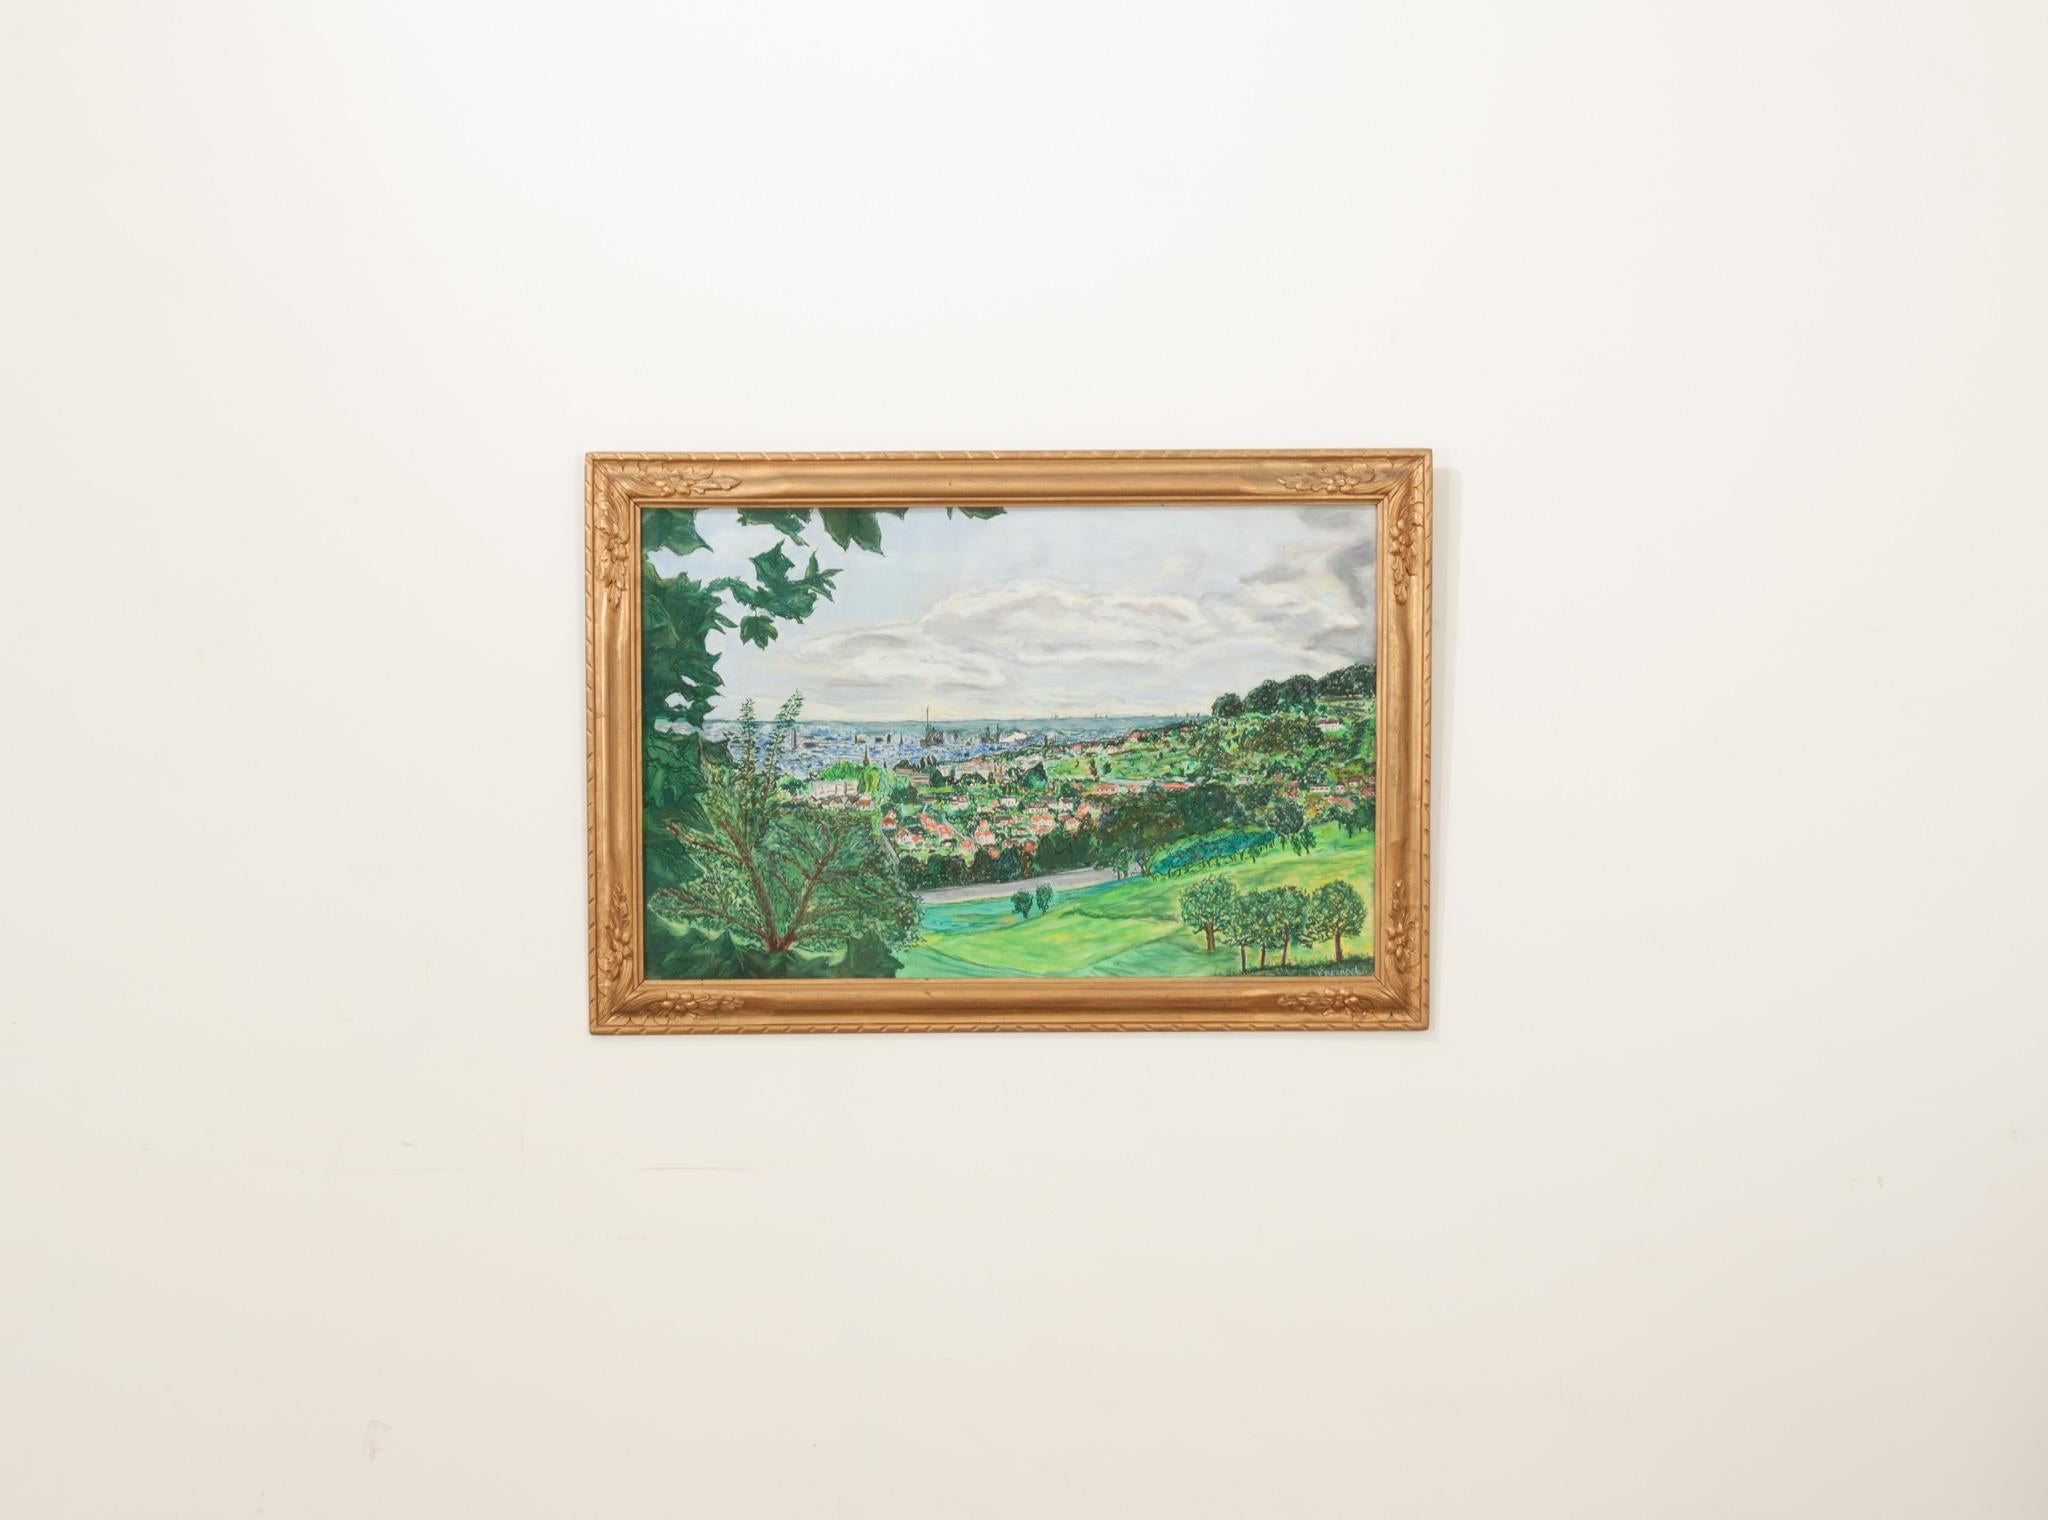 A wonderfully large and vibrant landscape painting from France. Signed in the bottom right corner by the artist. Protected behind antique rolled glass in a carved gilt frame. Fixed with a wire and ready to be hung in your interior. Make sure to view